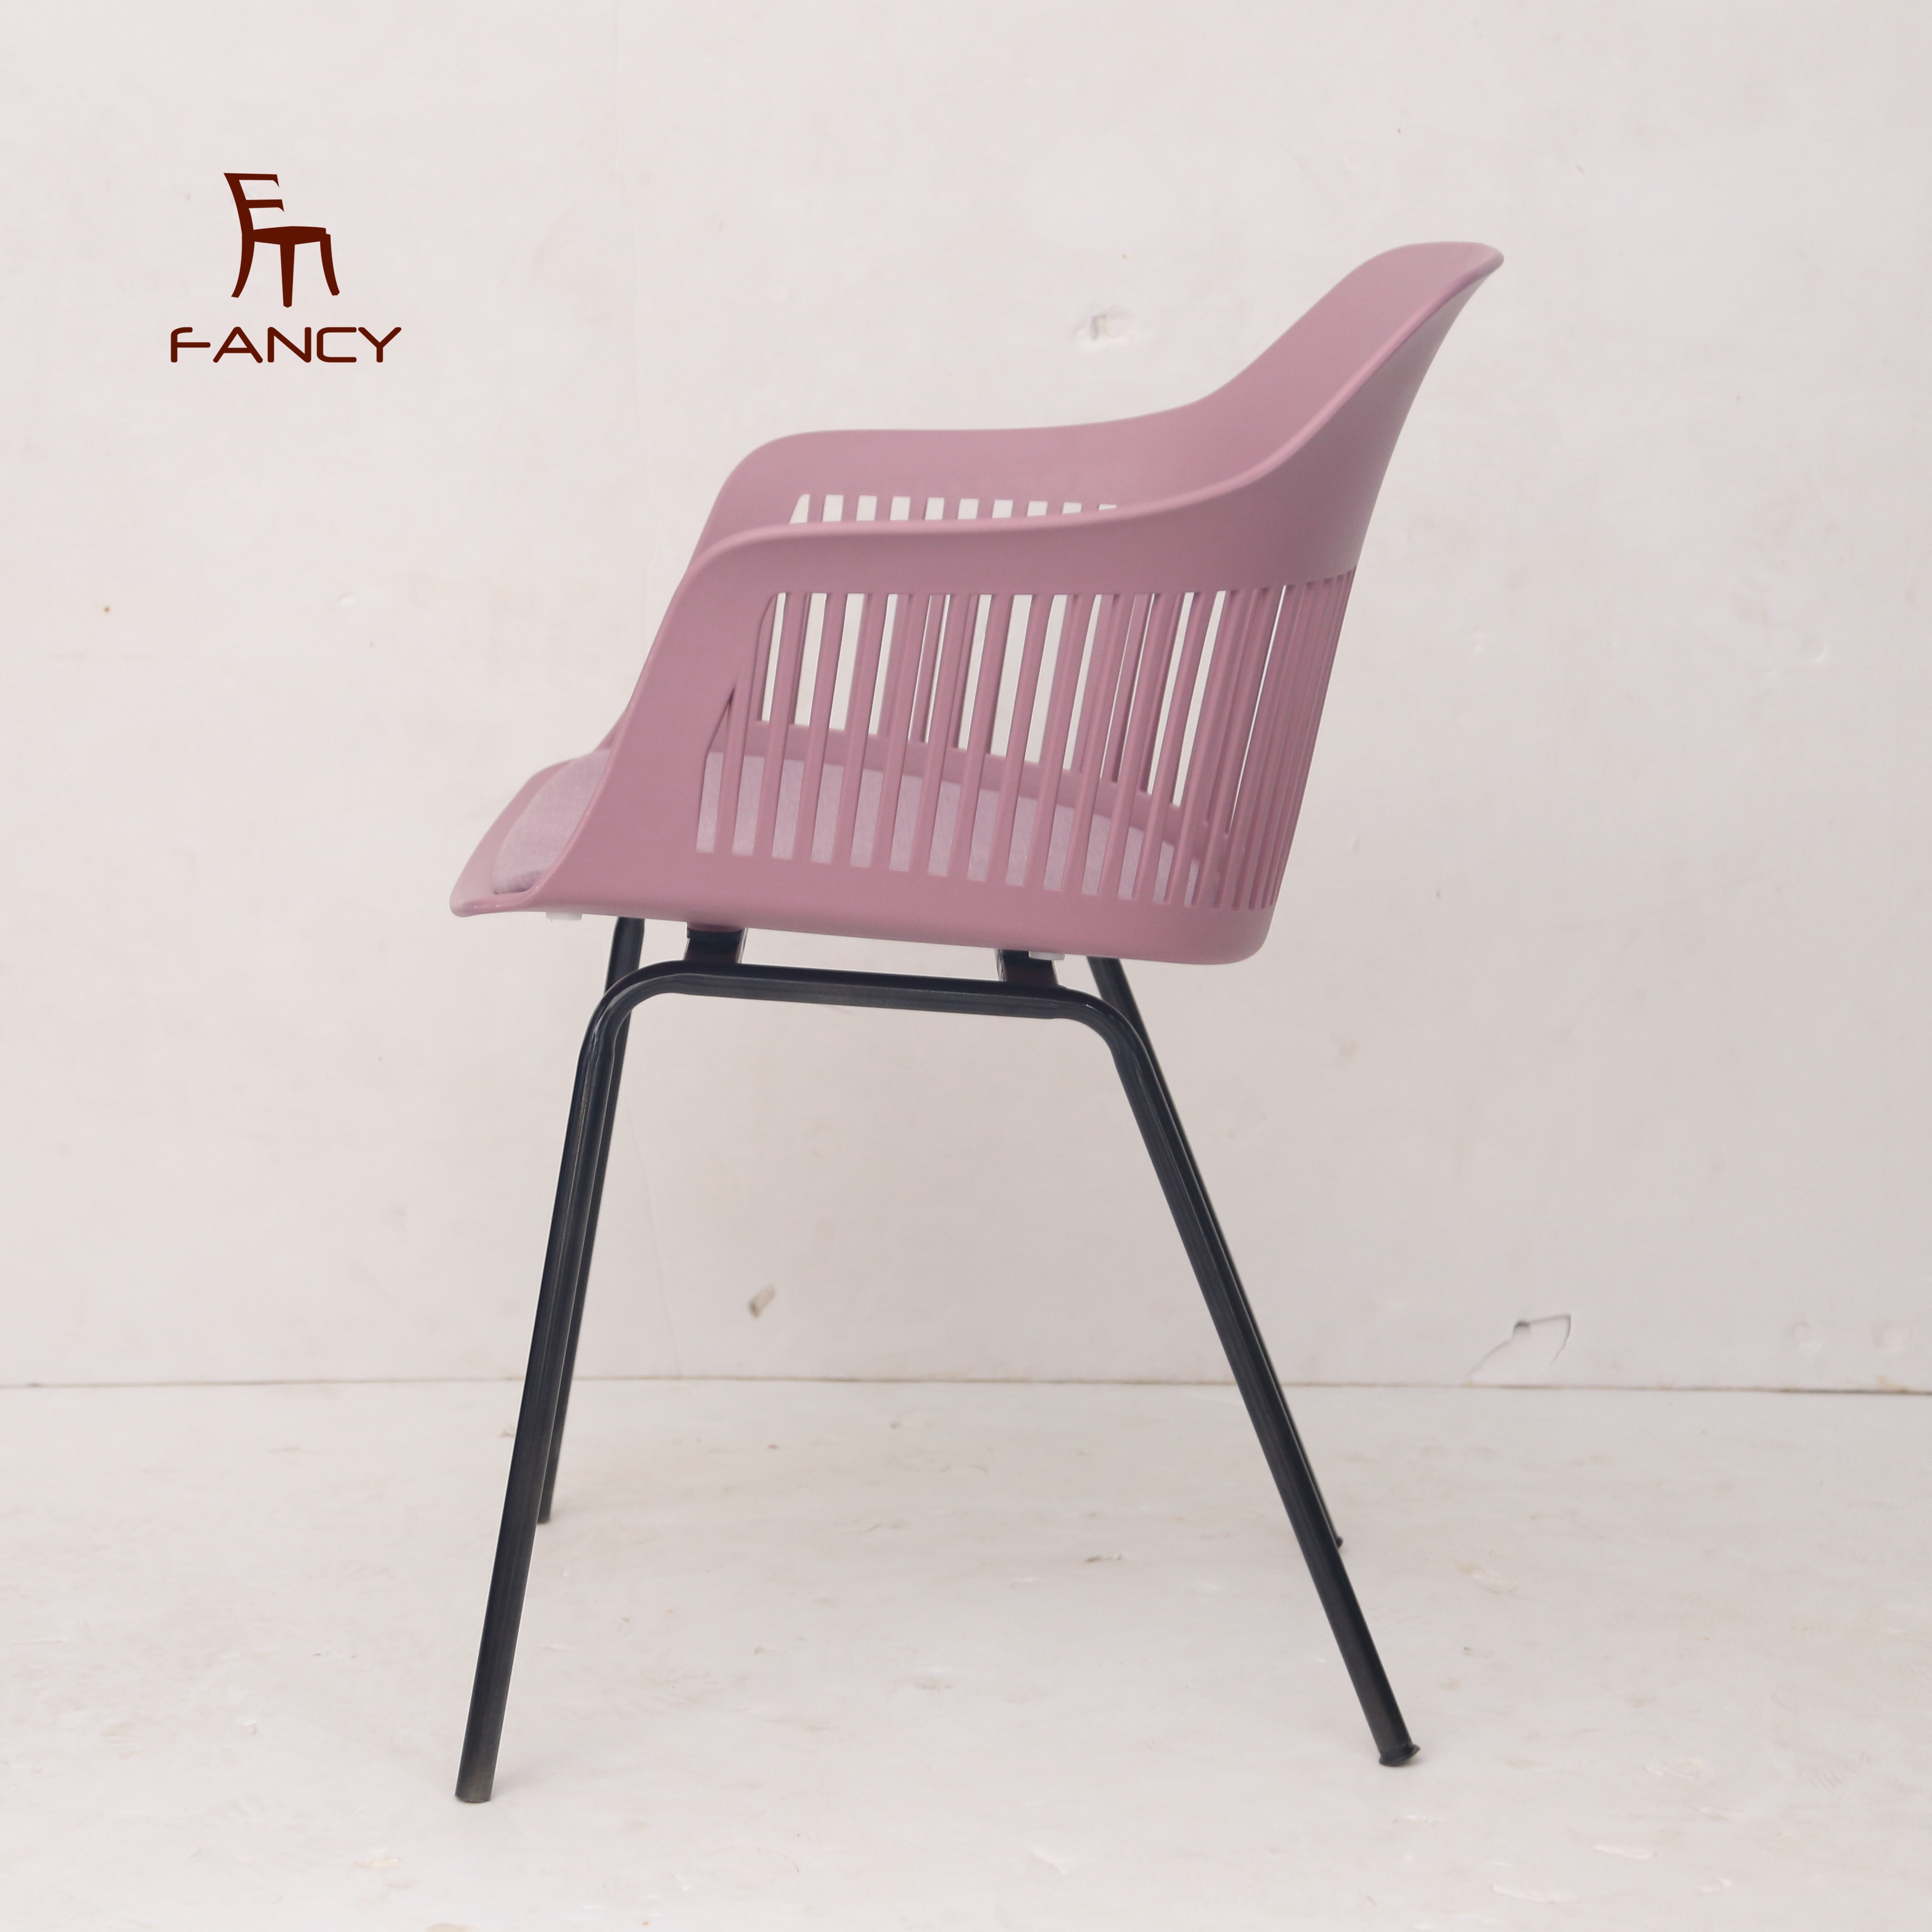 Cheap Price Home Furniture Dining Restaurant Cafe Plastic Chair 